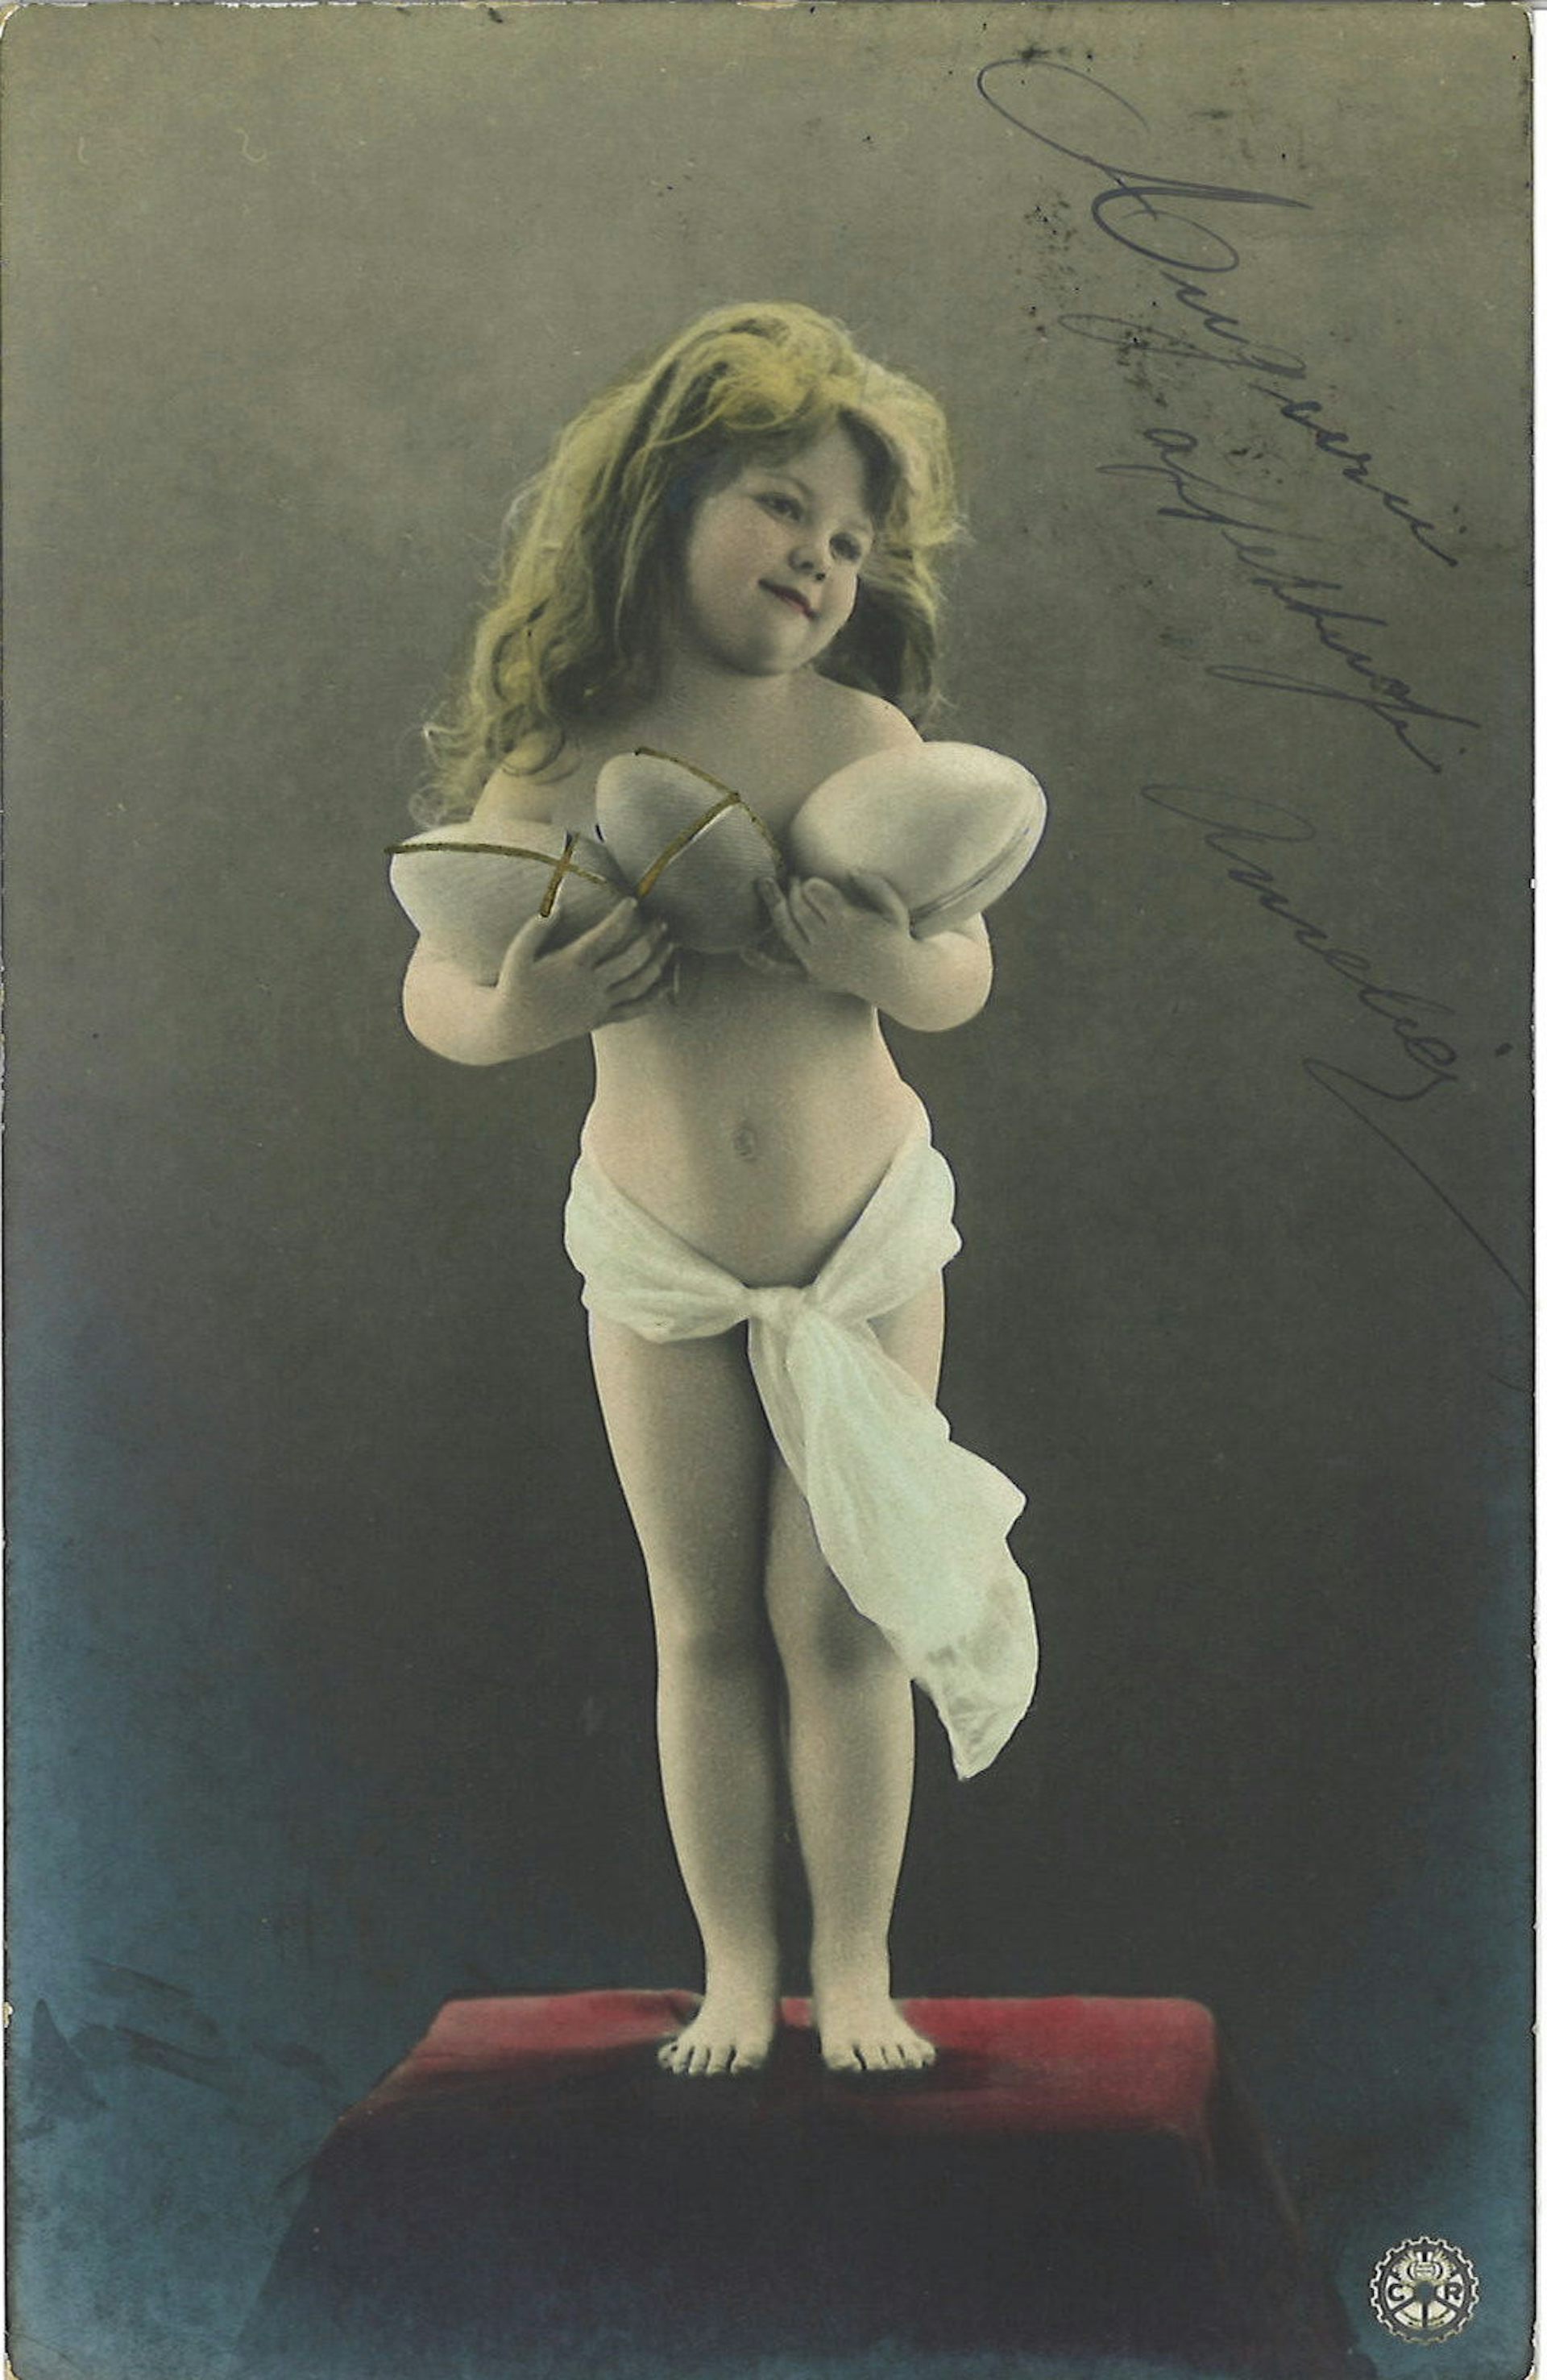 Between innocence and experience the sexualisation of girlhood in 19th century postcards photo